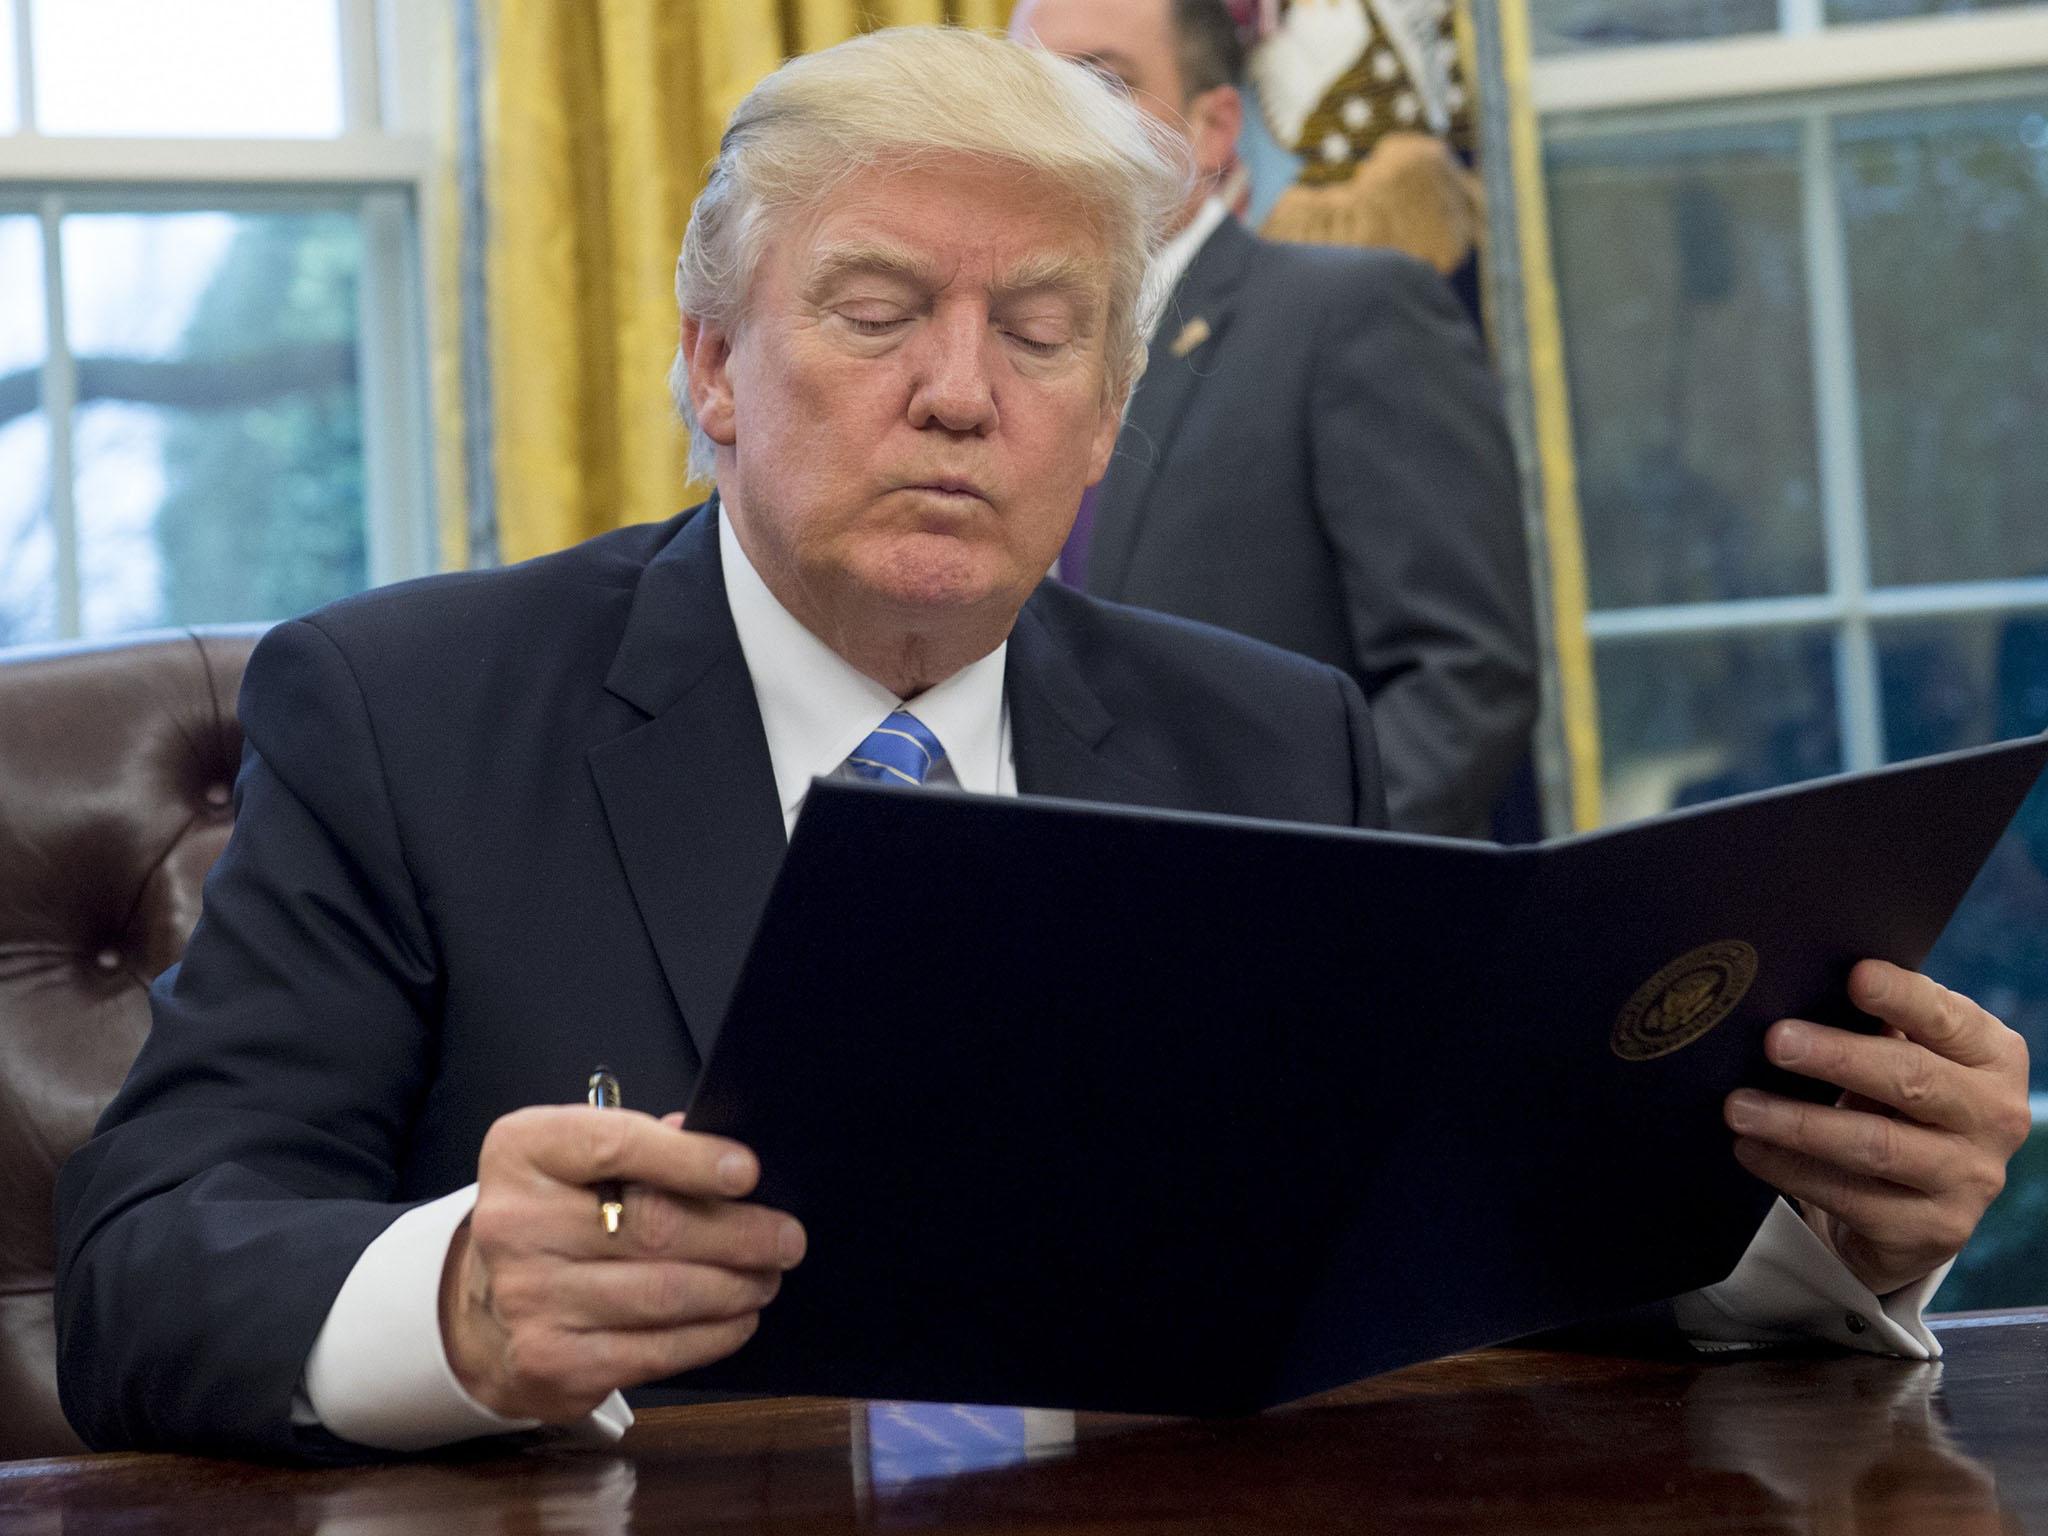 US President Donald Trump reads an executive order withdrawing the US from the Trans-Pacific Partnership prior to signing it in the Oval Office of the White House in Washington, DC, January 23, 2017